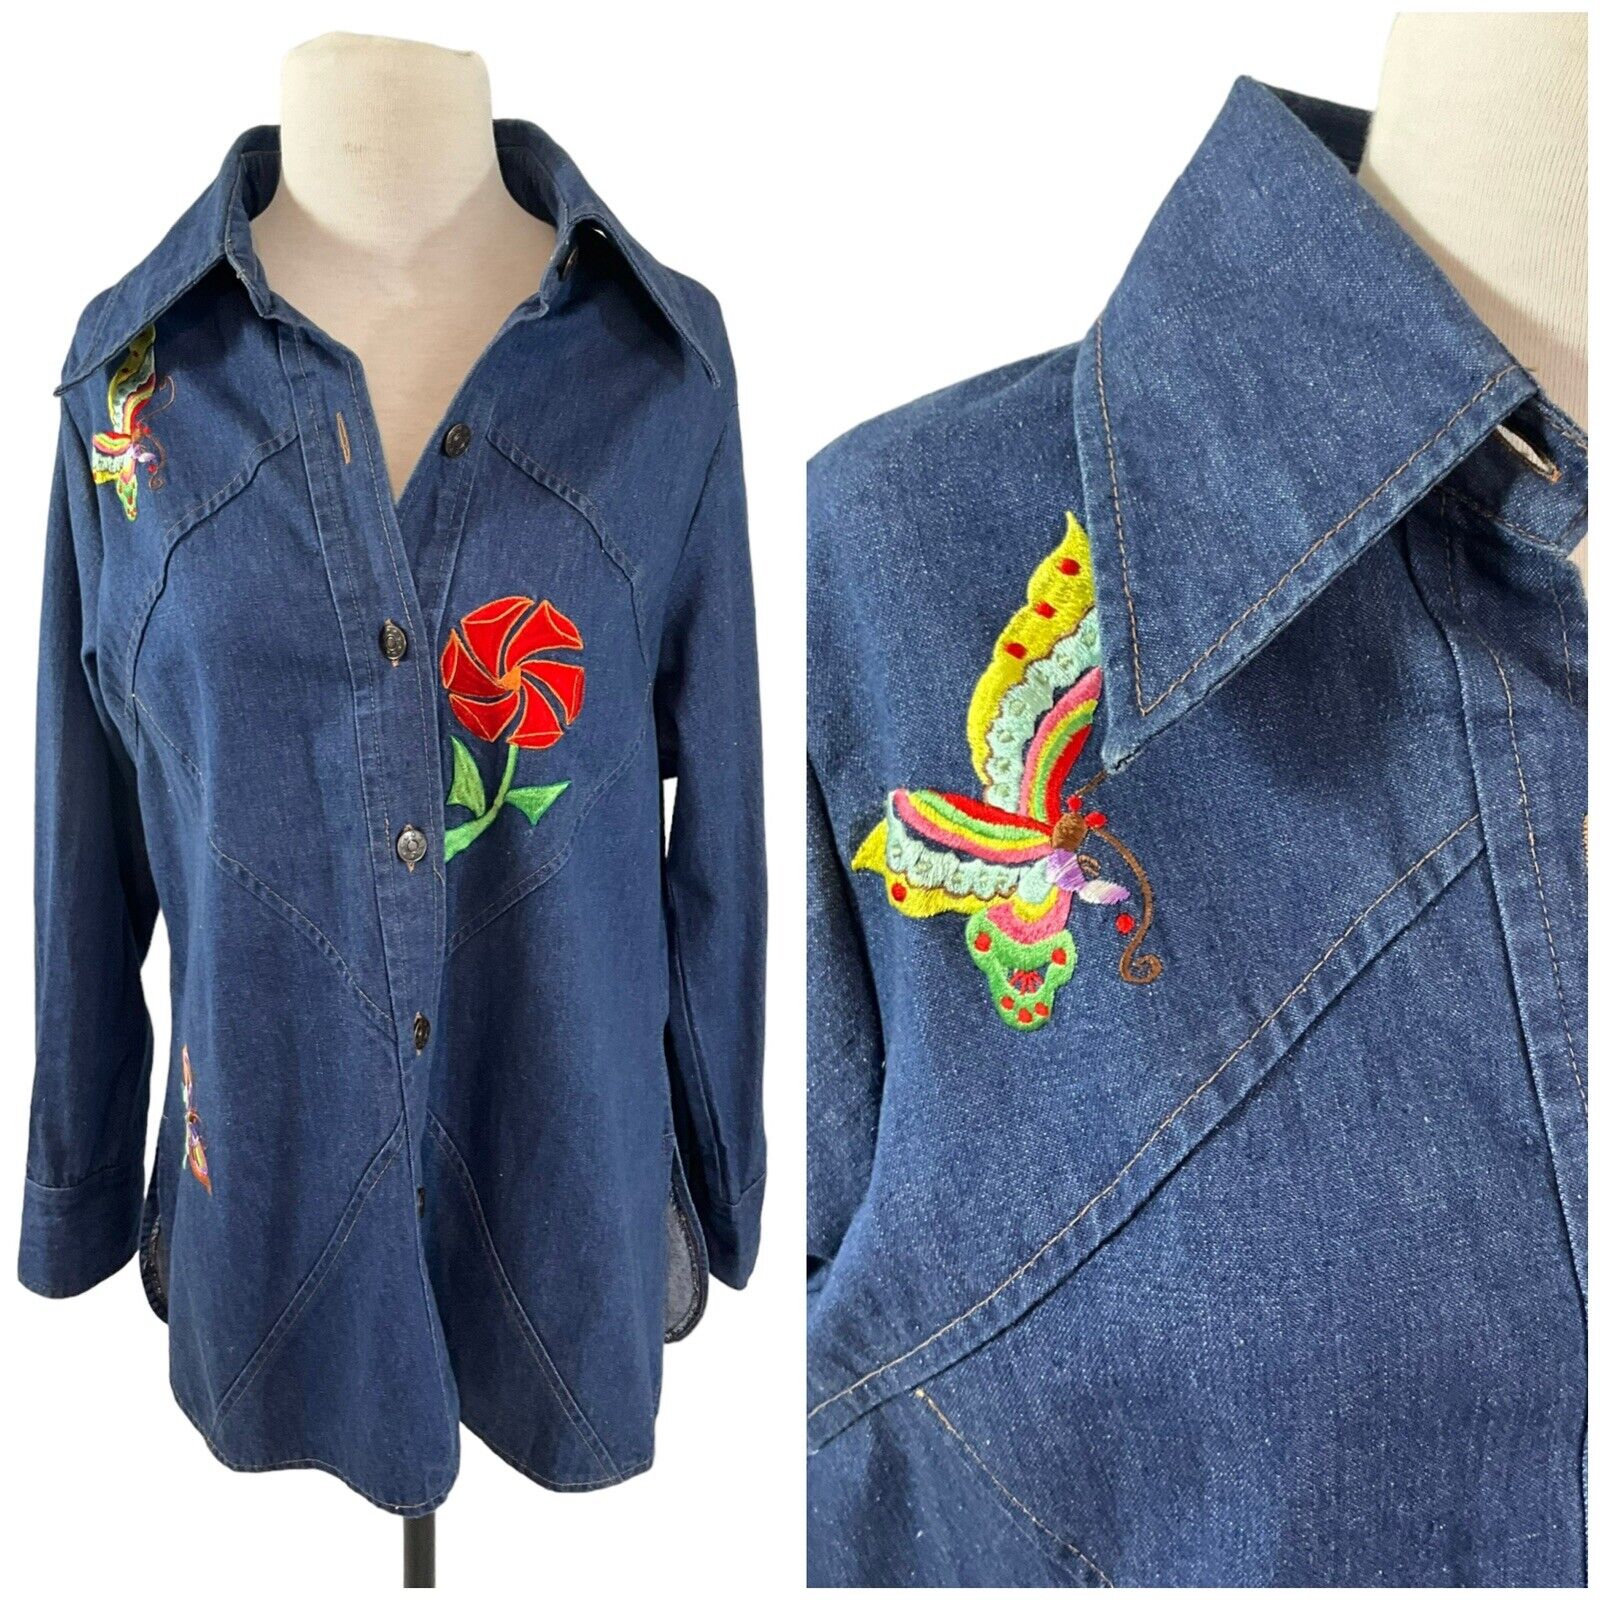 Vintage 80s Denim Shacket Shirt Jacket Embroidered Floral Butterfly Hippy Top ML